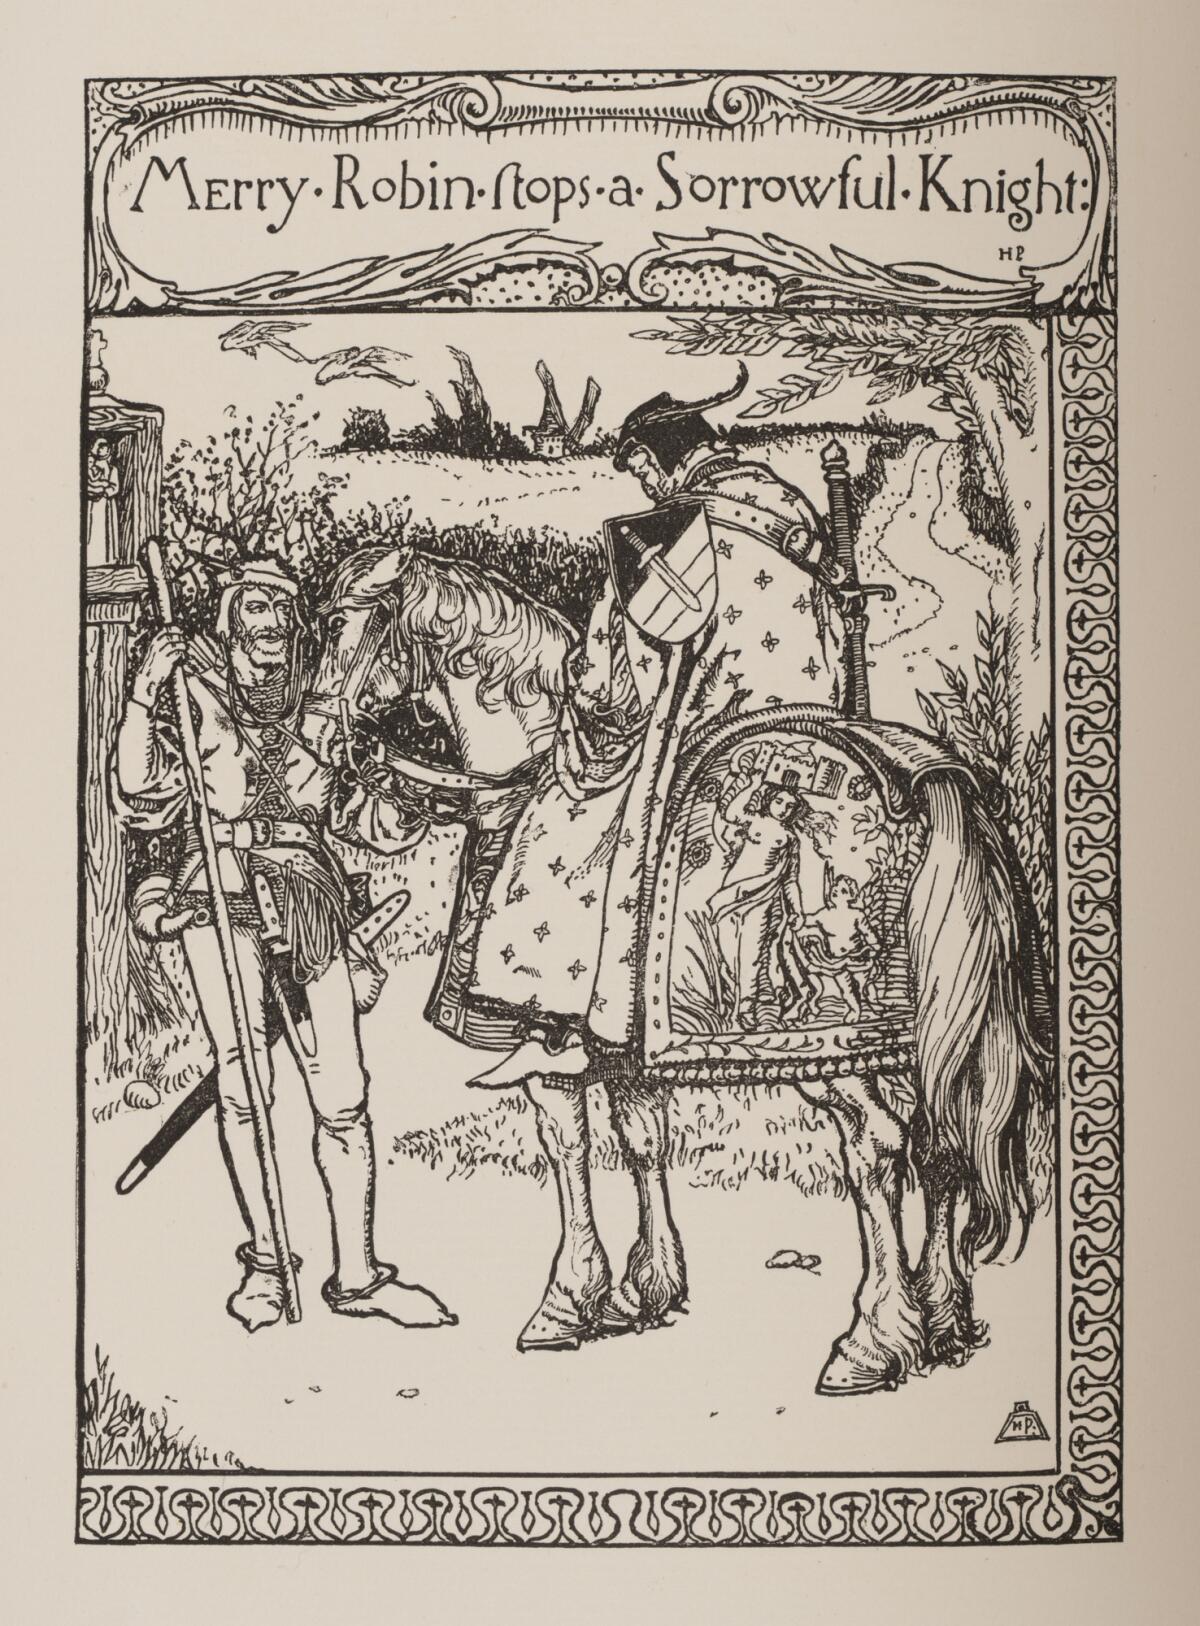 An illustration of a robed knight on horseback.